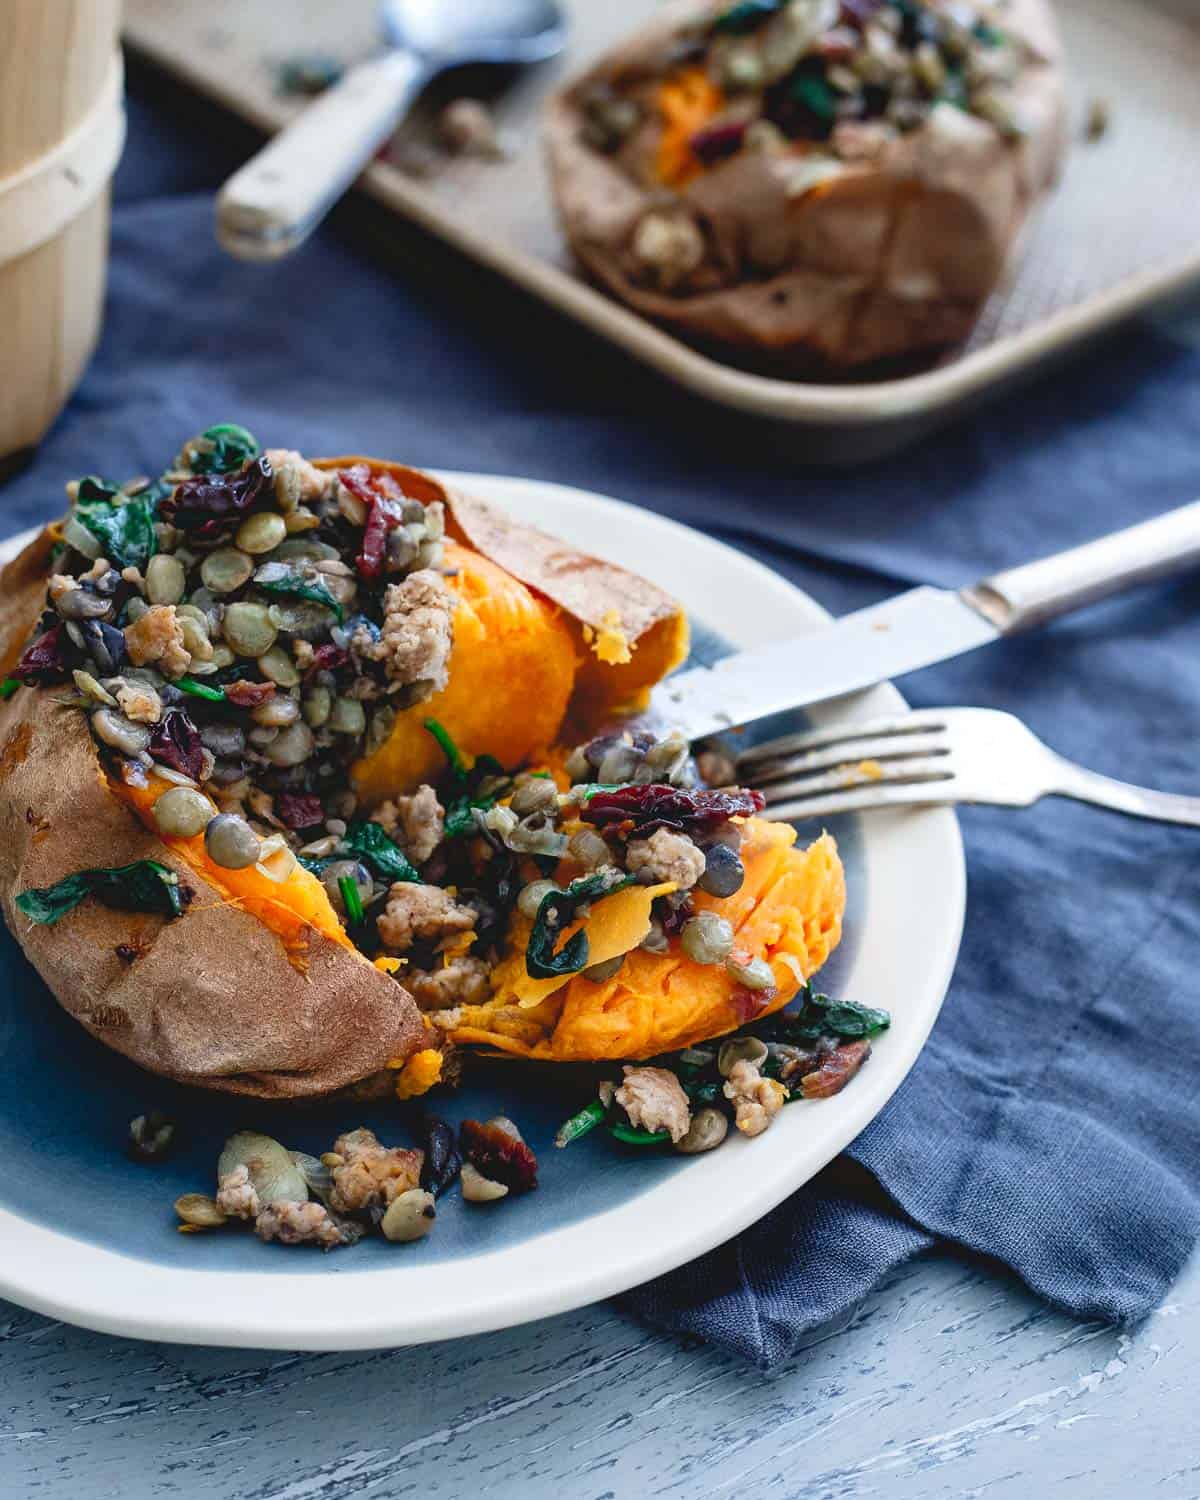 Savory lentils and turkey sausage are given a sweet bite with the addition of dried tart cherries in these stuffed sweet potatoes.